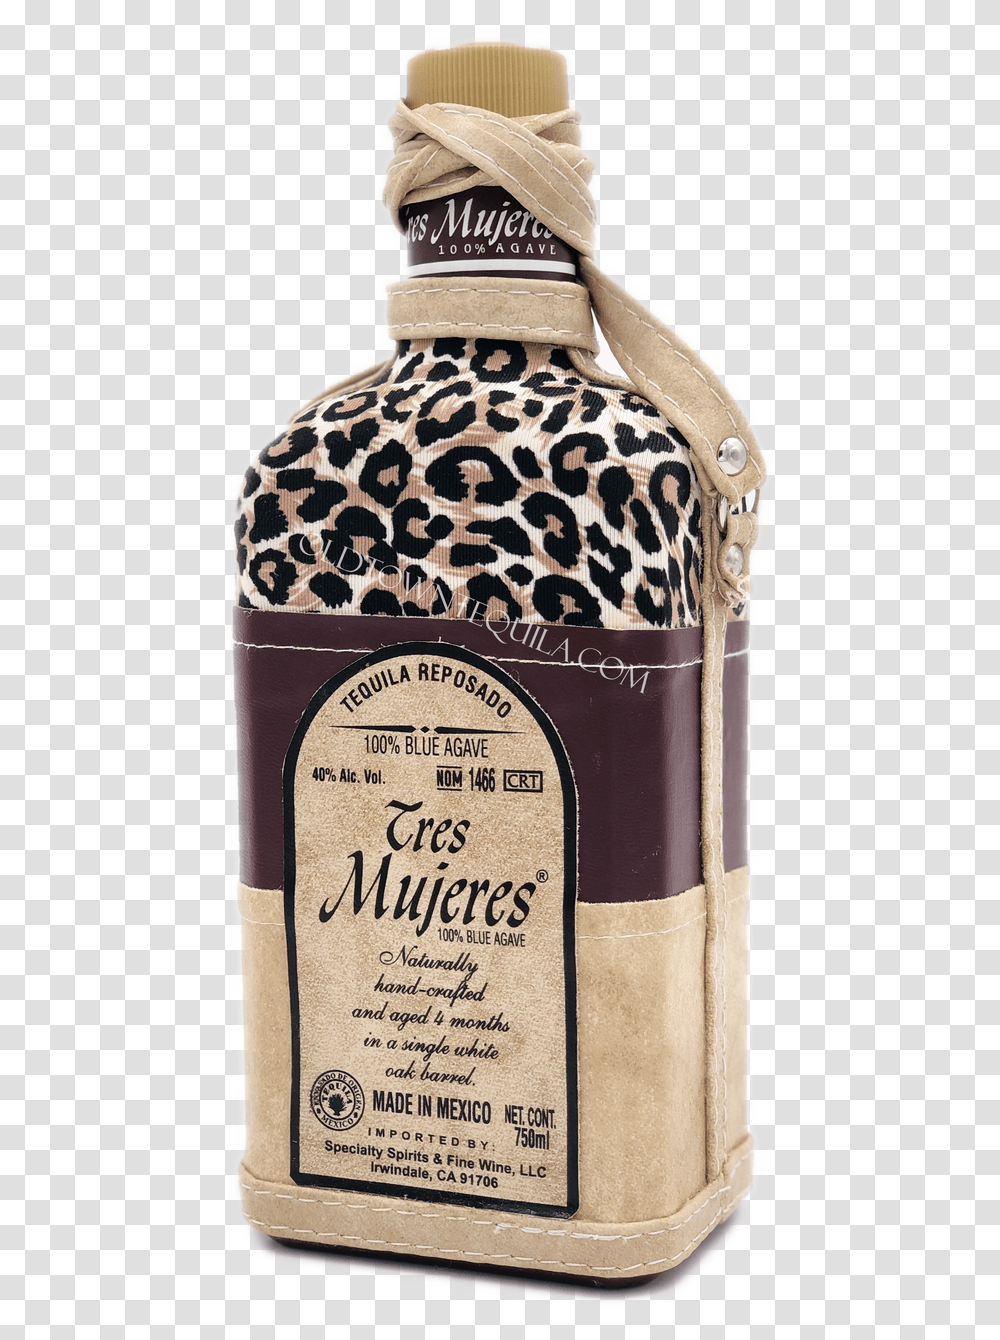 Tequila Tres Mujeres Reposado 750ml Tequila Tres Mujeres, Liquor, Alcohol, Beverage, Bottle Transparent Png